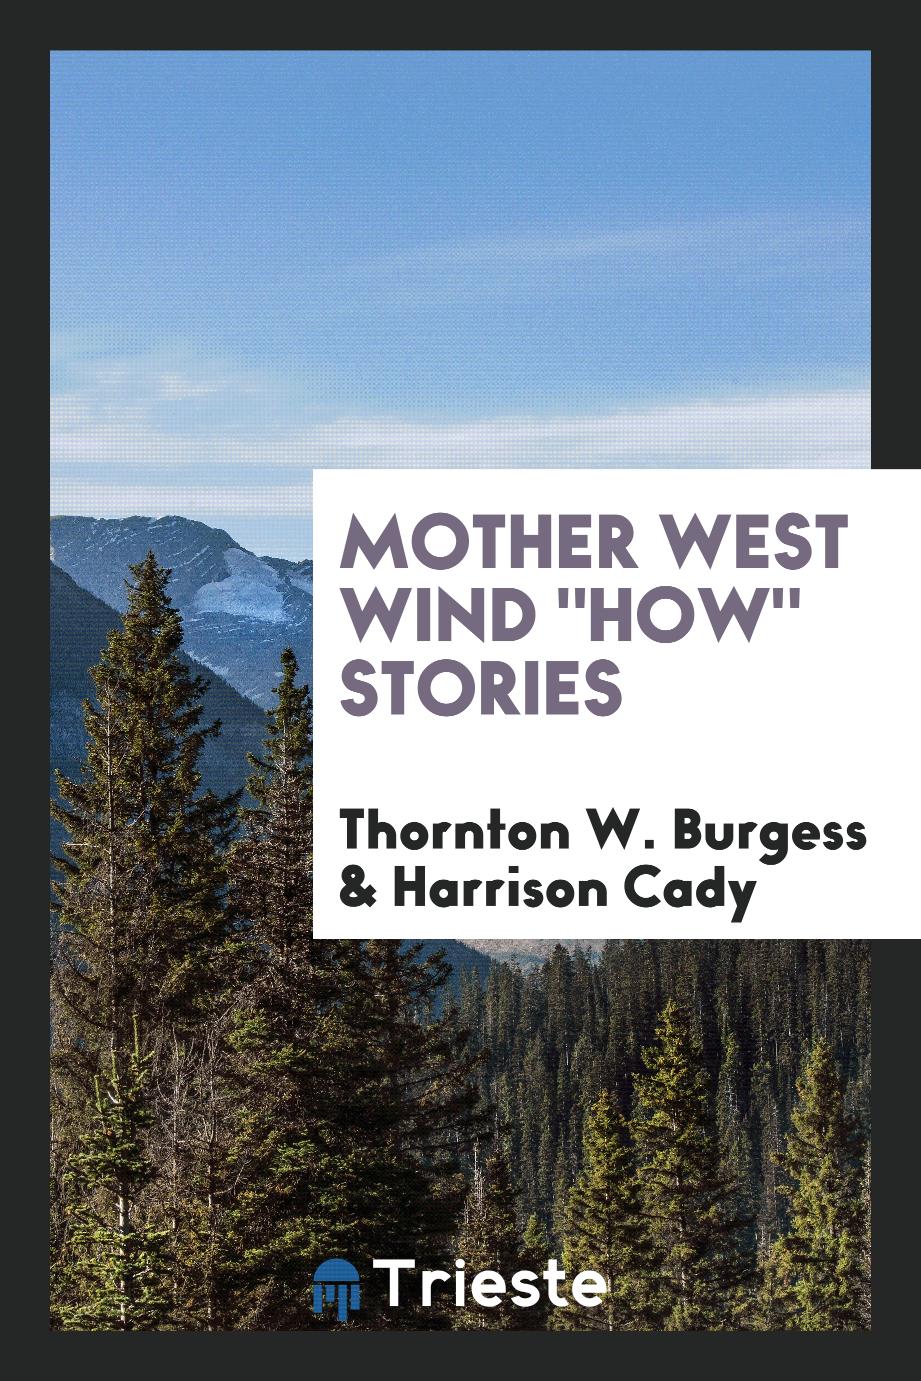 Mother West Wind "how" stories